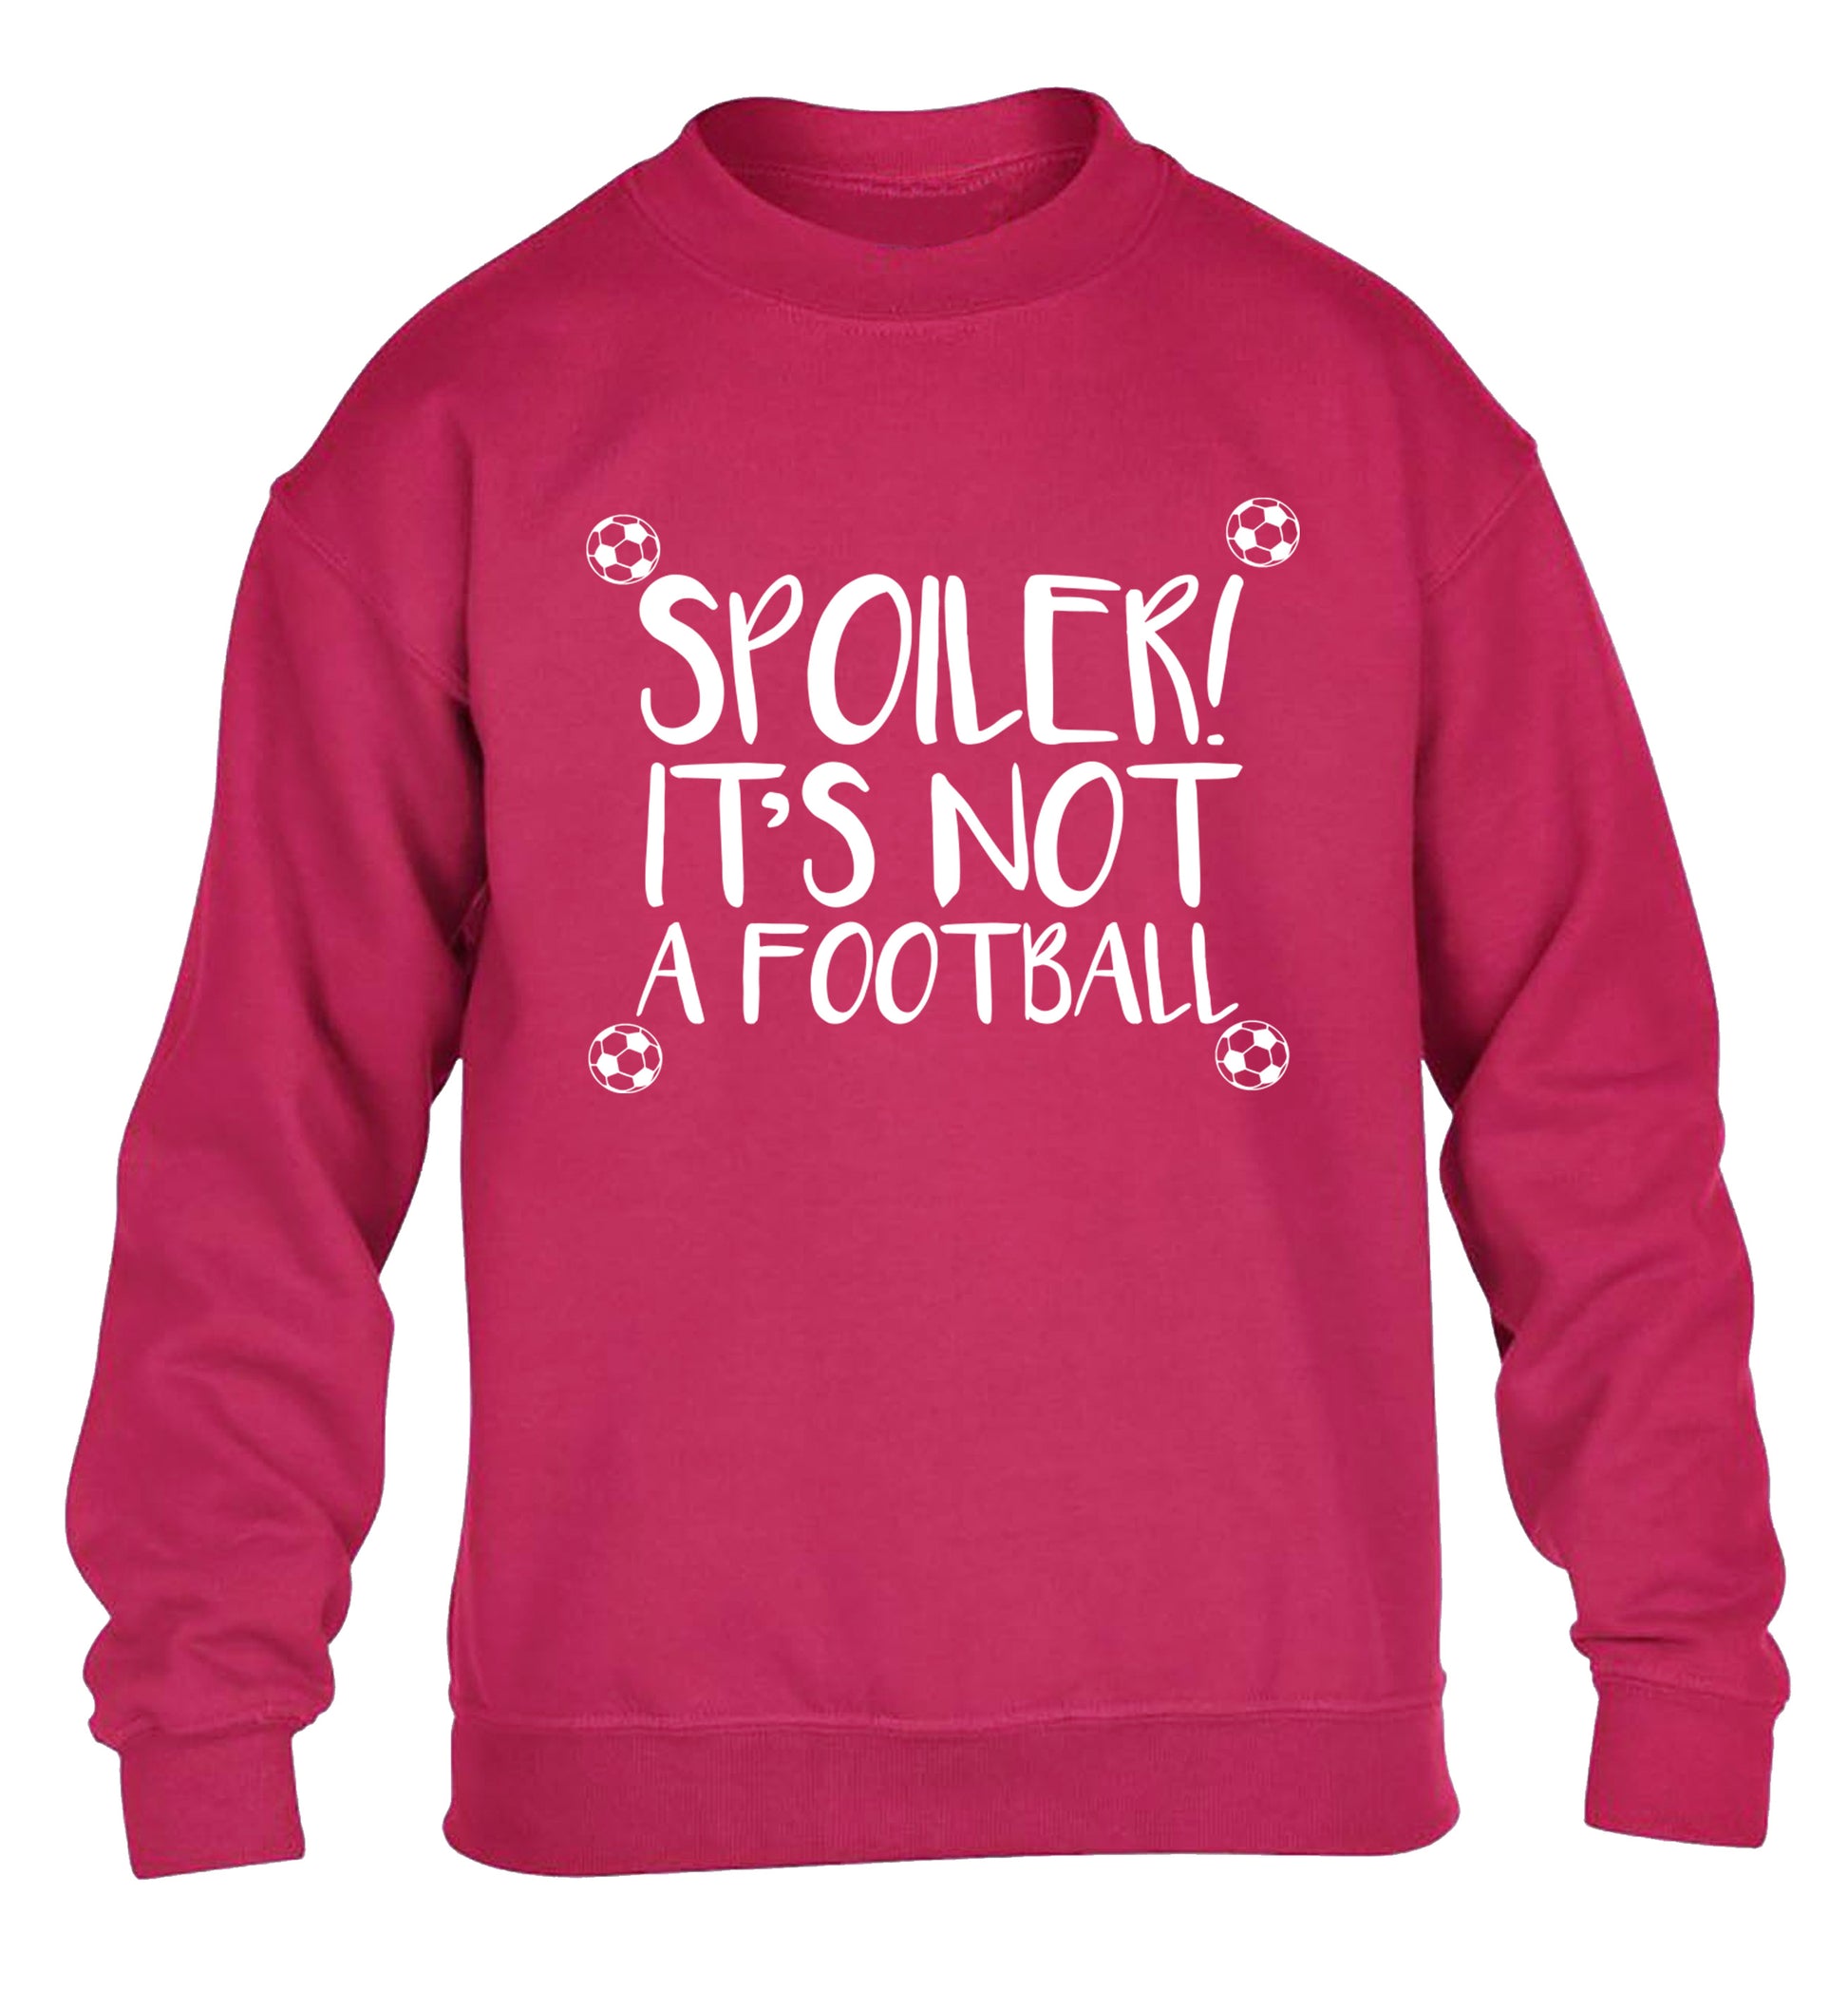 Spoiler it's not a football children's pink sweater 12-13 Years